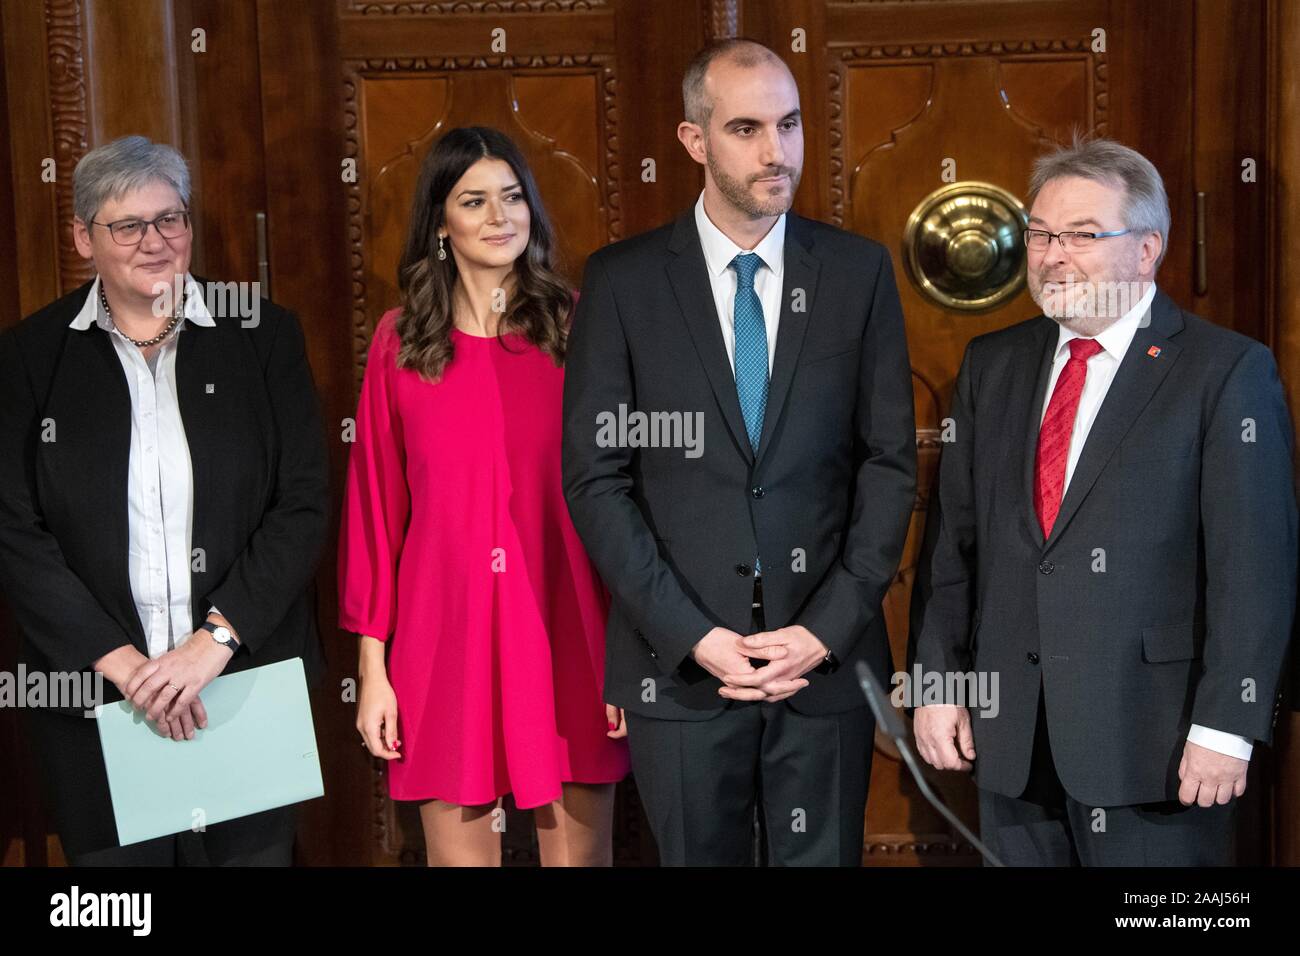 Hanover, Germany. 22nd Nov, 2019. Sabine Tegtmeyer-Dette (l-r), First City Councillor, Derya Onay, Belit Onay (Greens), Hannover's new Lord Mayor and Mayor Thomas Hermann are about to hand over the chain of office in the City Hall. Less than two weeks after his election, Hanover's new Lord Mayor Onay takes office. Credit: Sina Schuldt/dpa/Alamy Live News Stock Photo